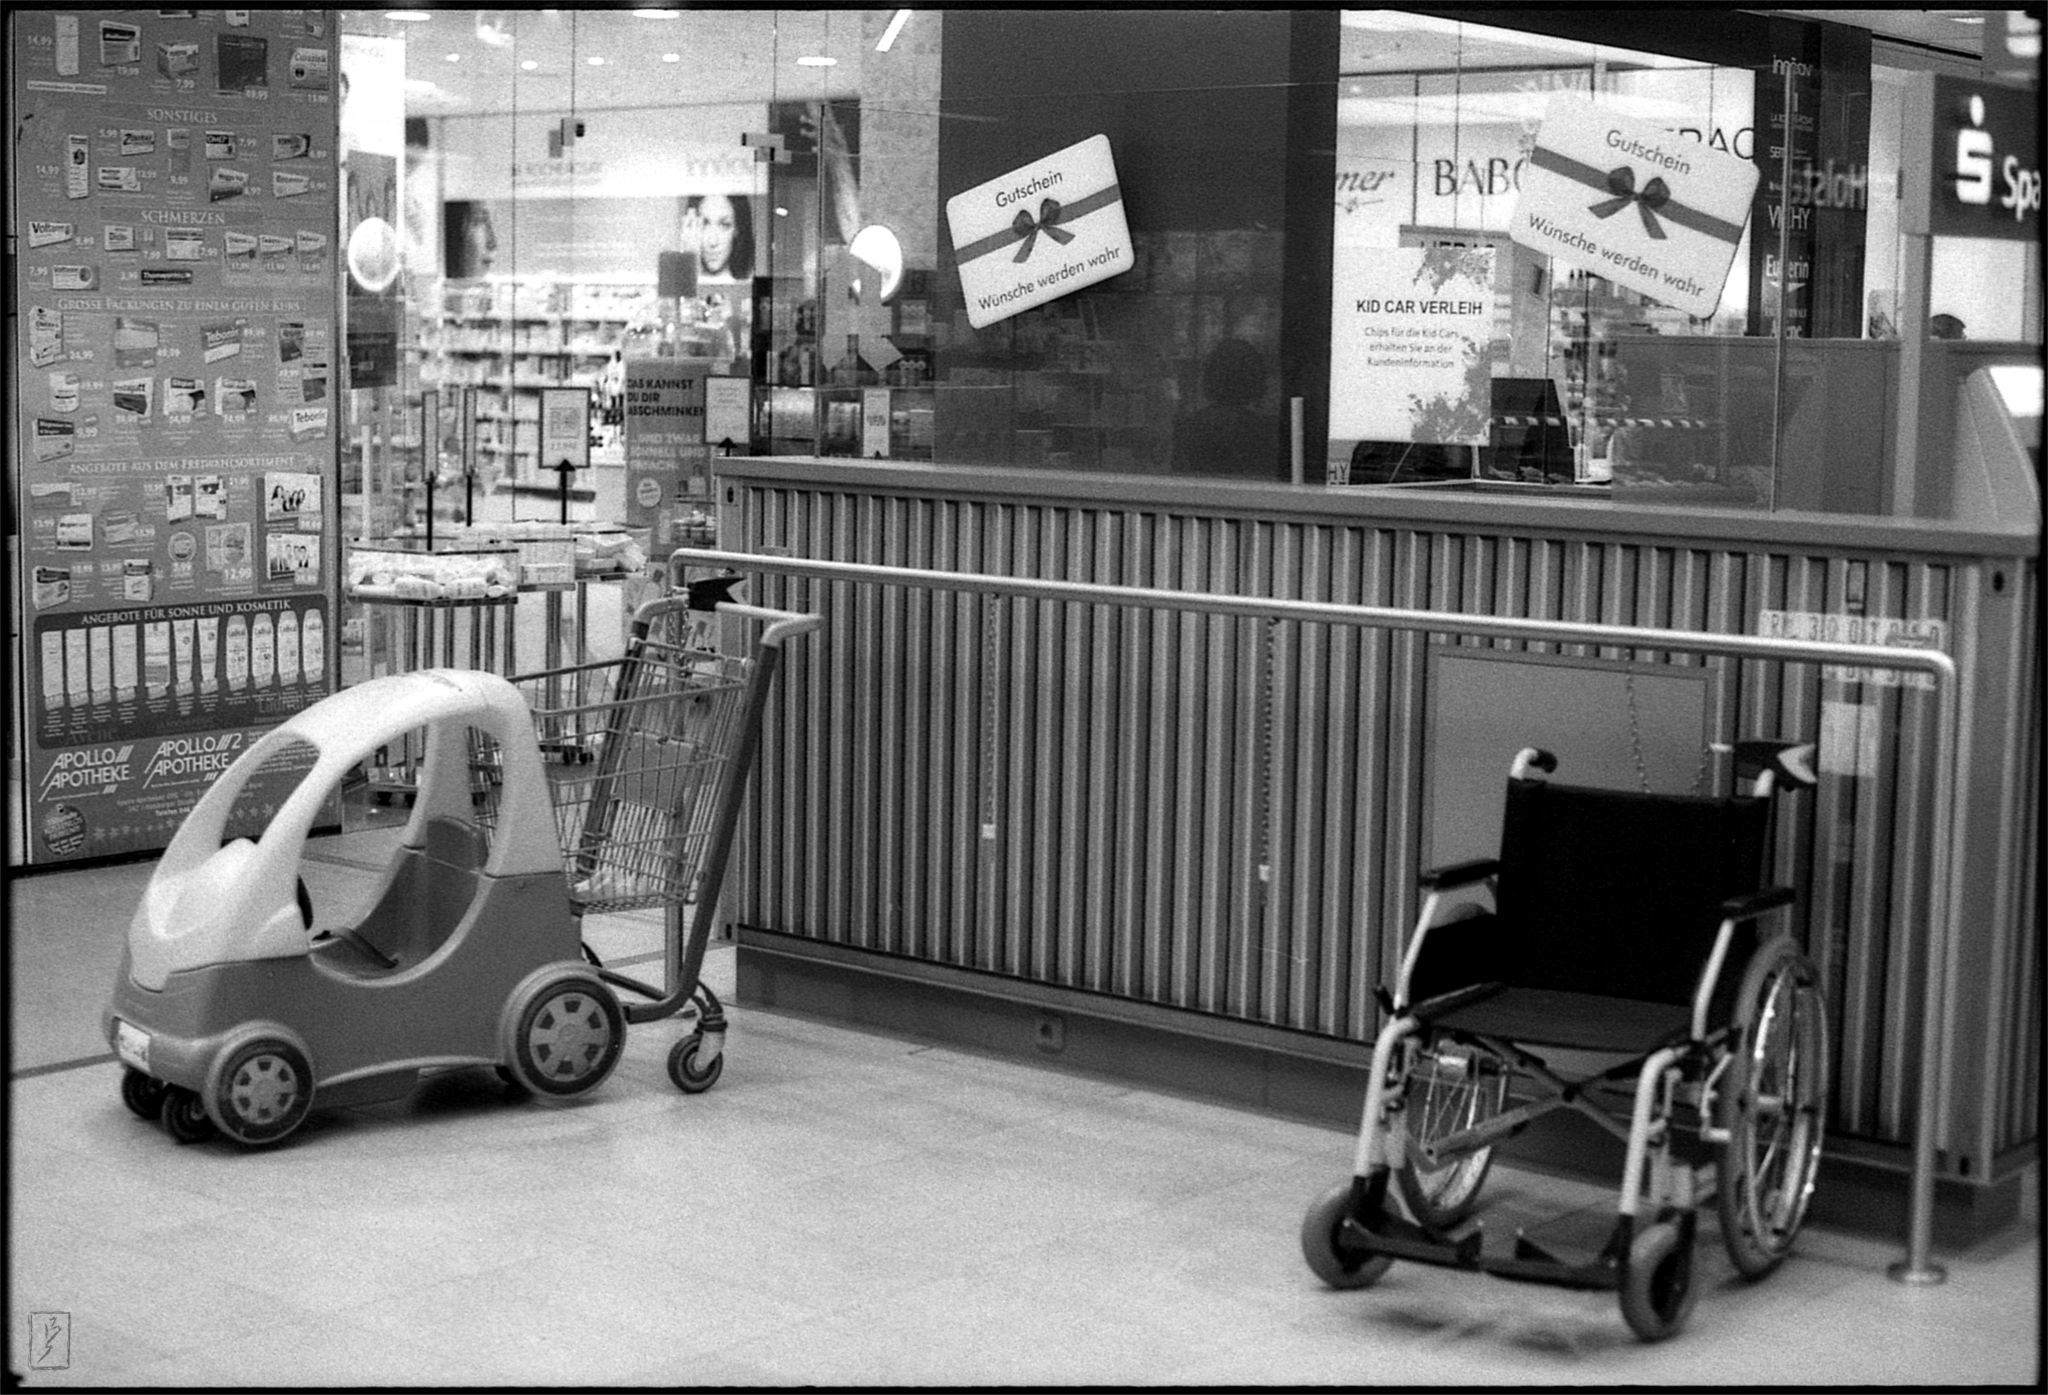 The shopping center "Hamburger Meile" provides buggies and wheelchairs for shoppers.